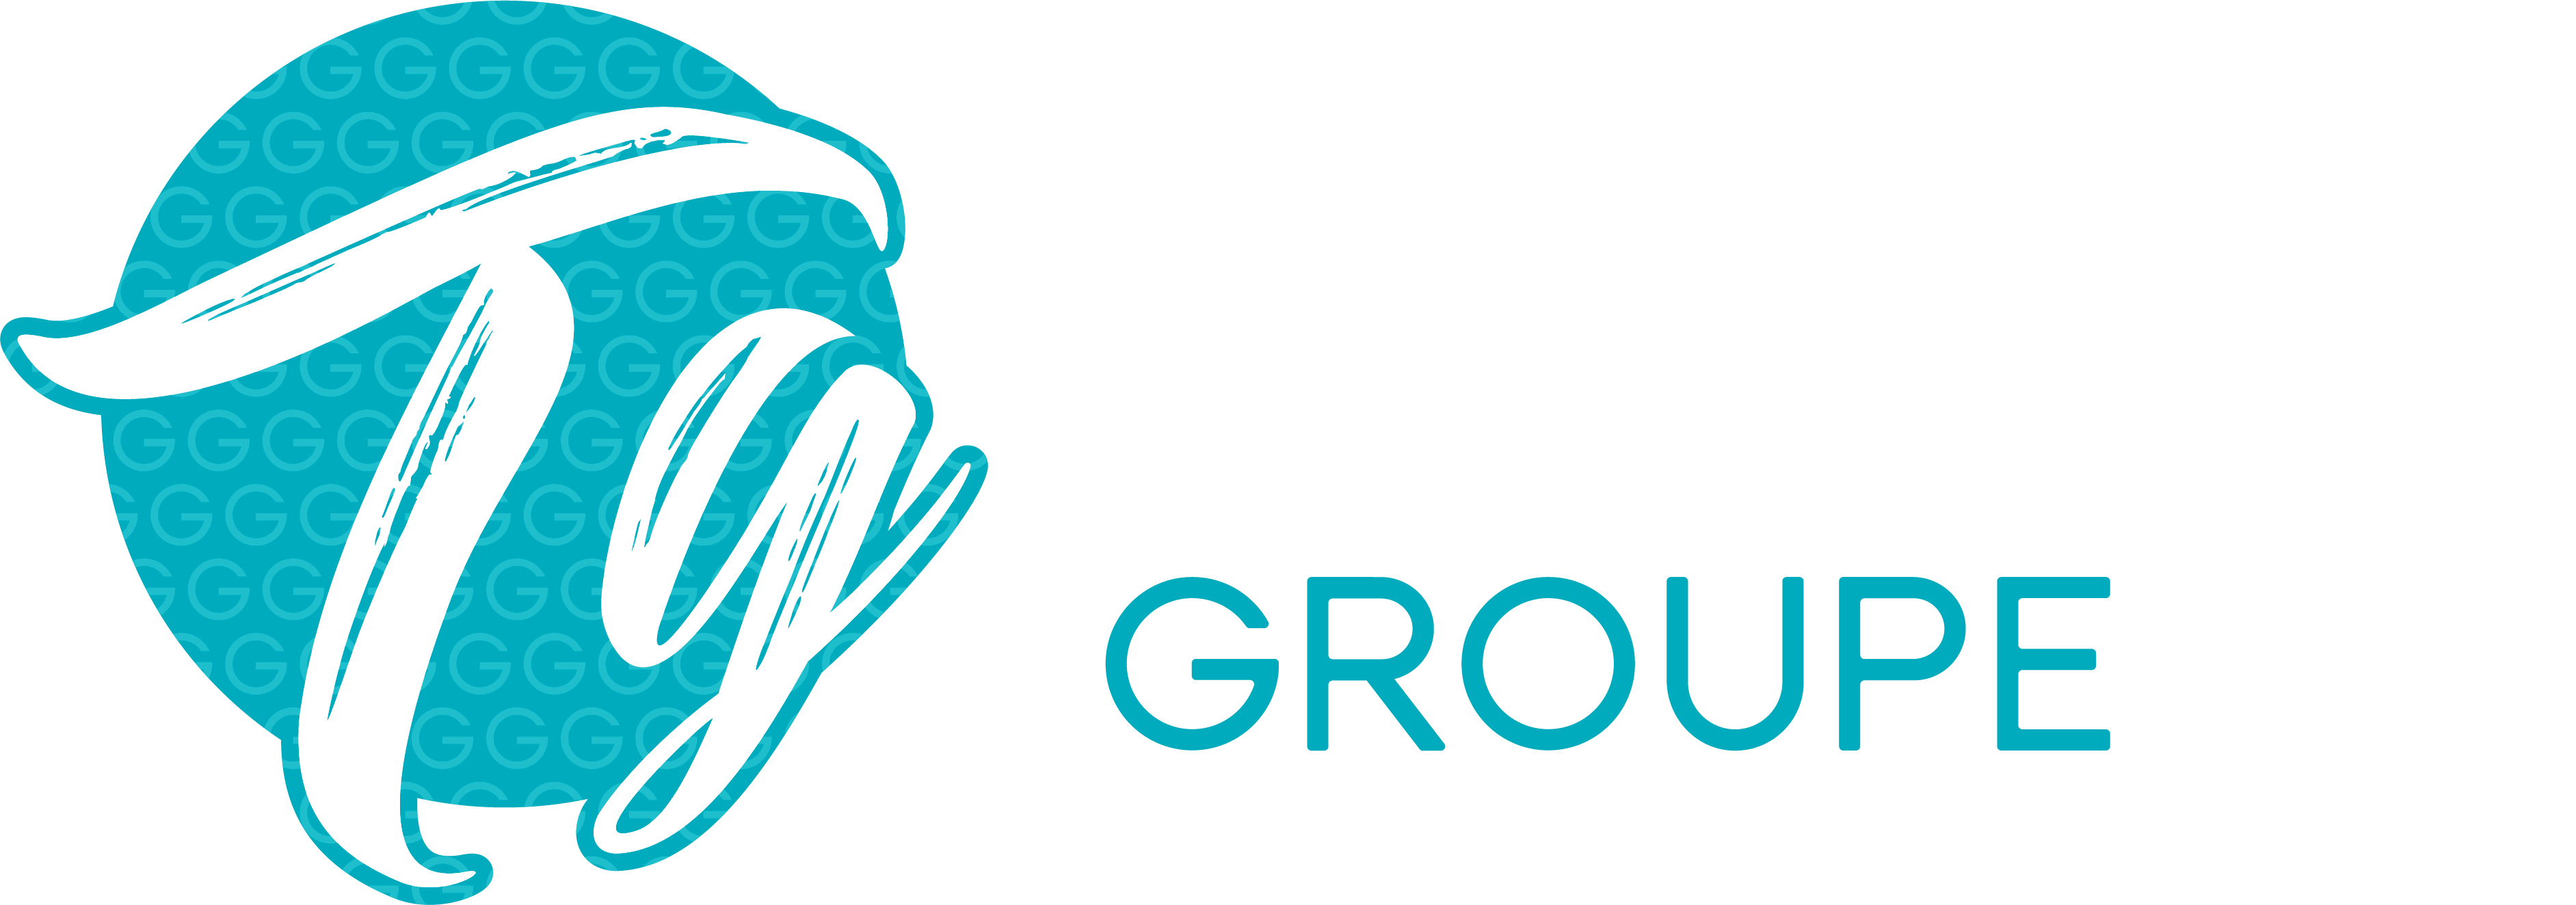 Thicent Groupe